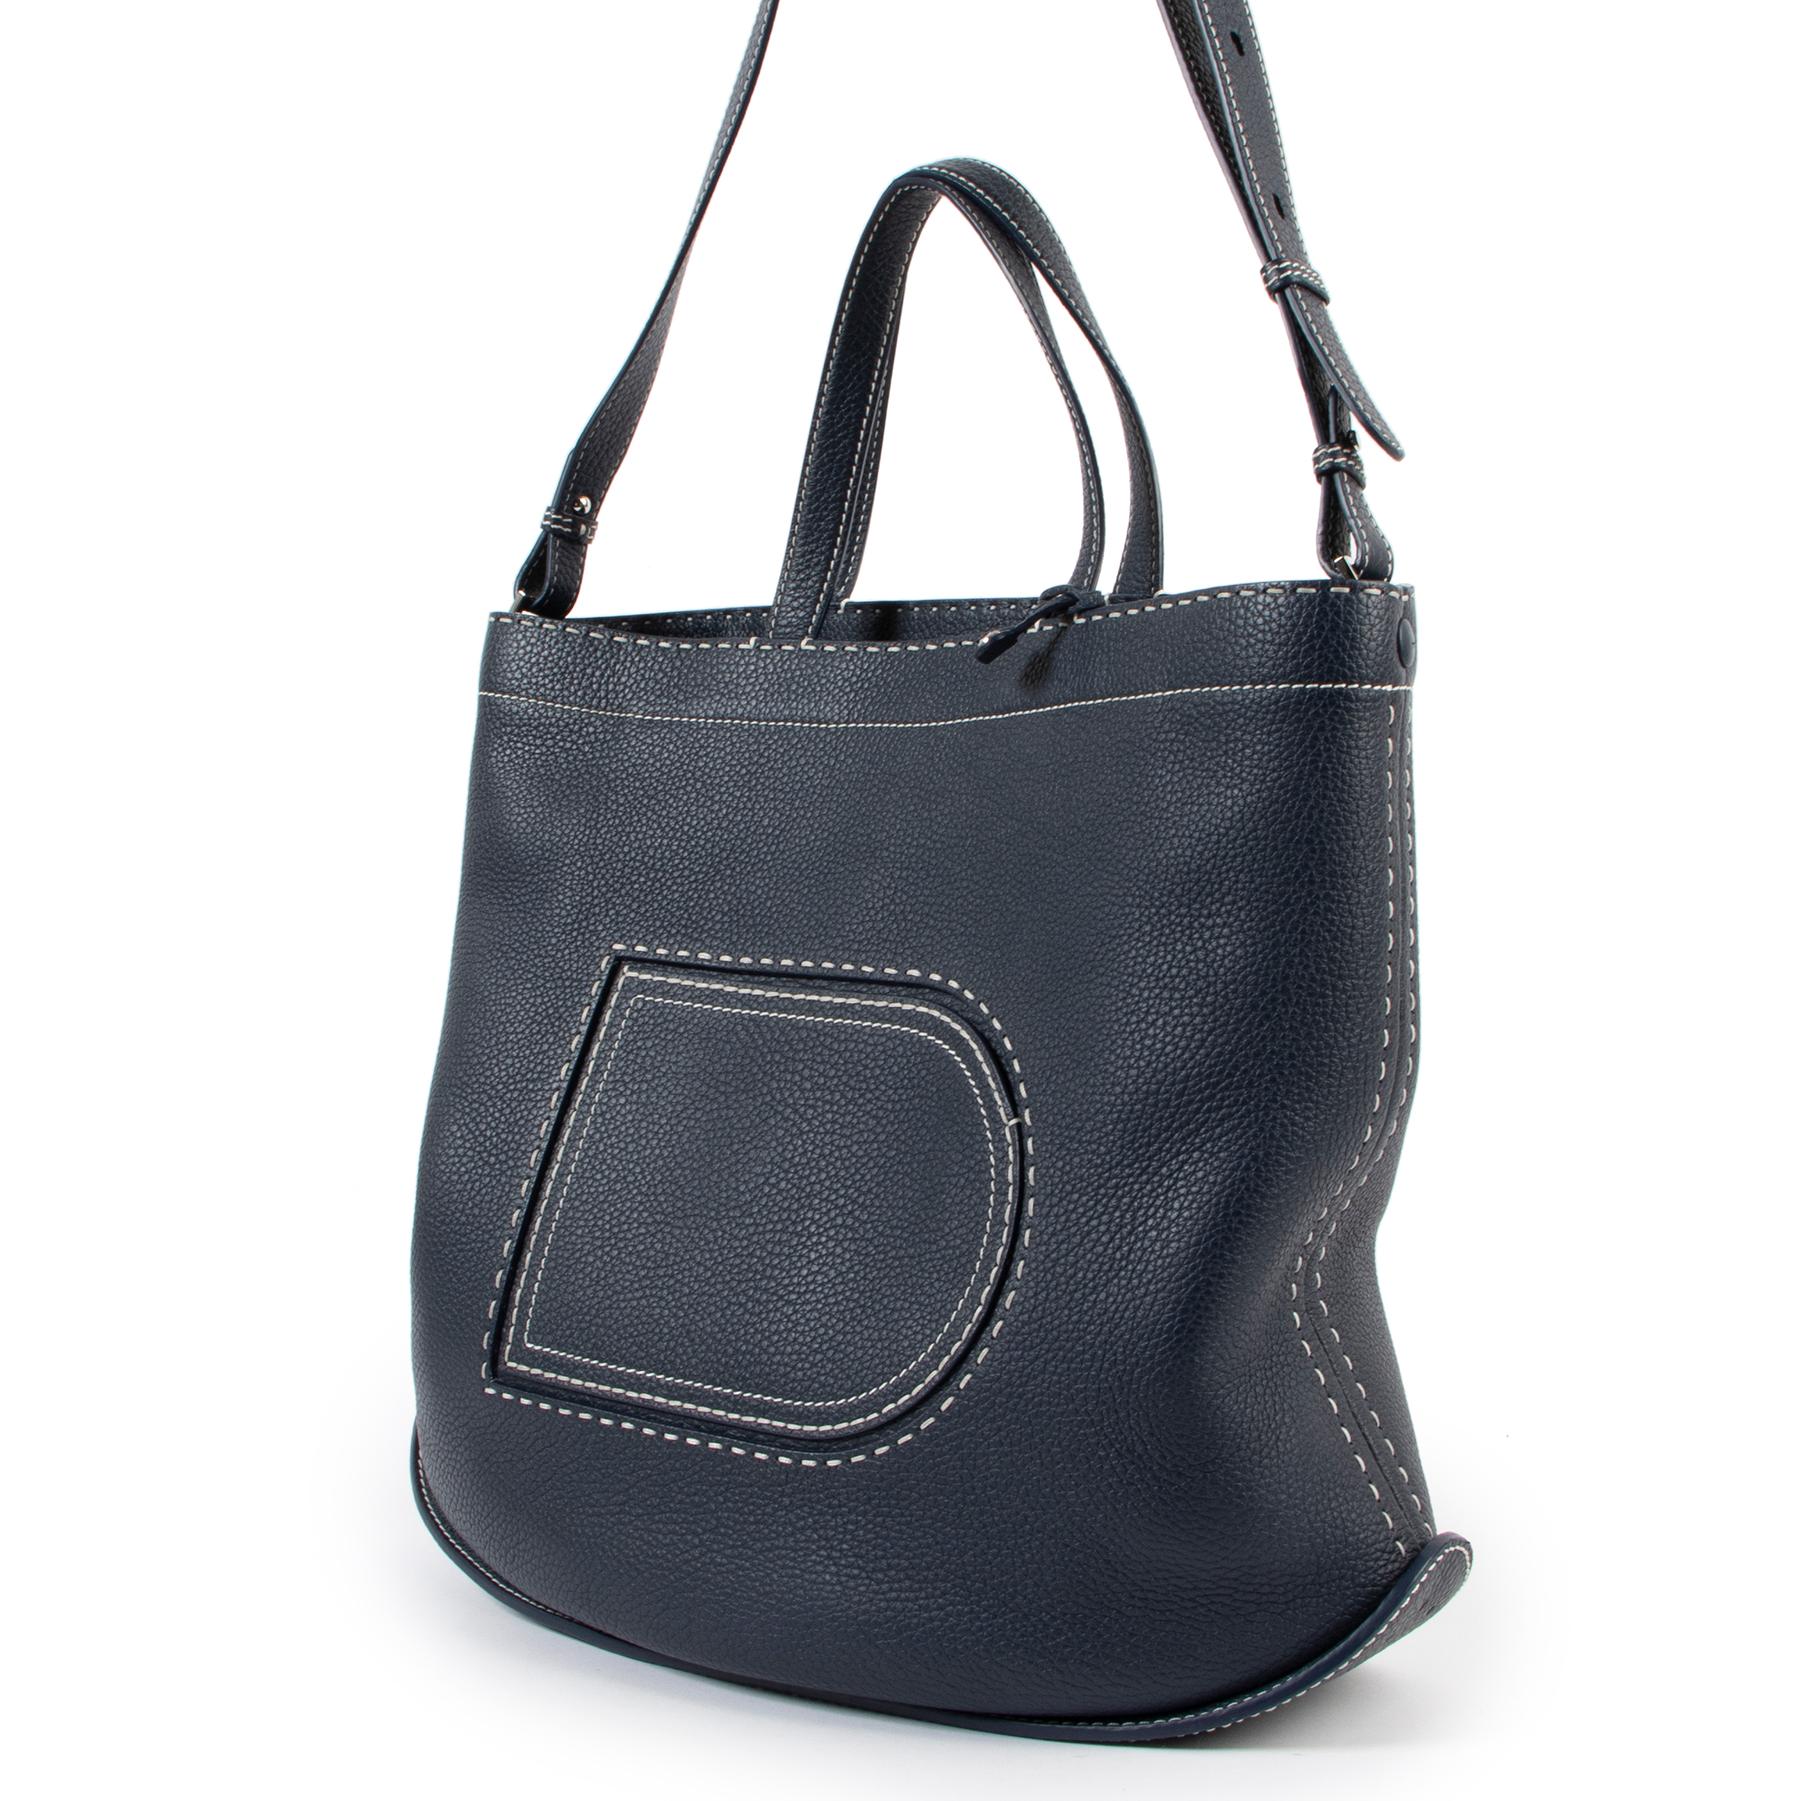 Delvaux Blue Pin Cabas Surpiqué

This Pin Cabas is the ideal bag to store all of your personal or work-related belongings.

Crafted from soft Taurillon leather, with a D-shaped logo on the front and finished with palladium hardware. The inside